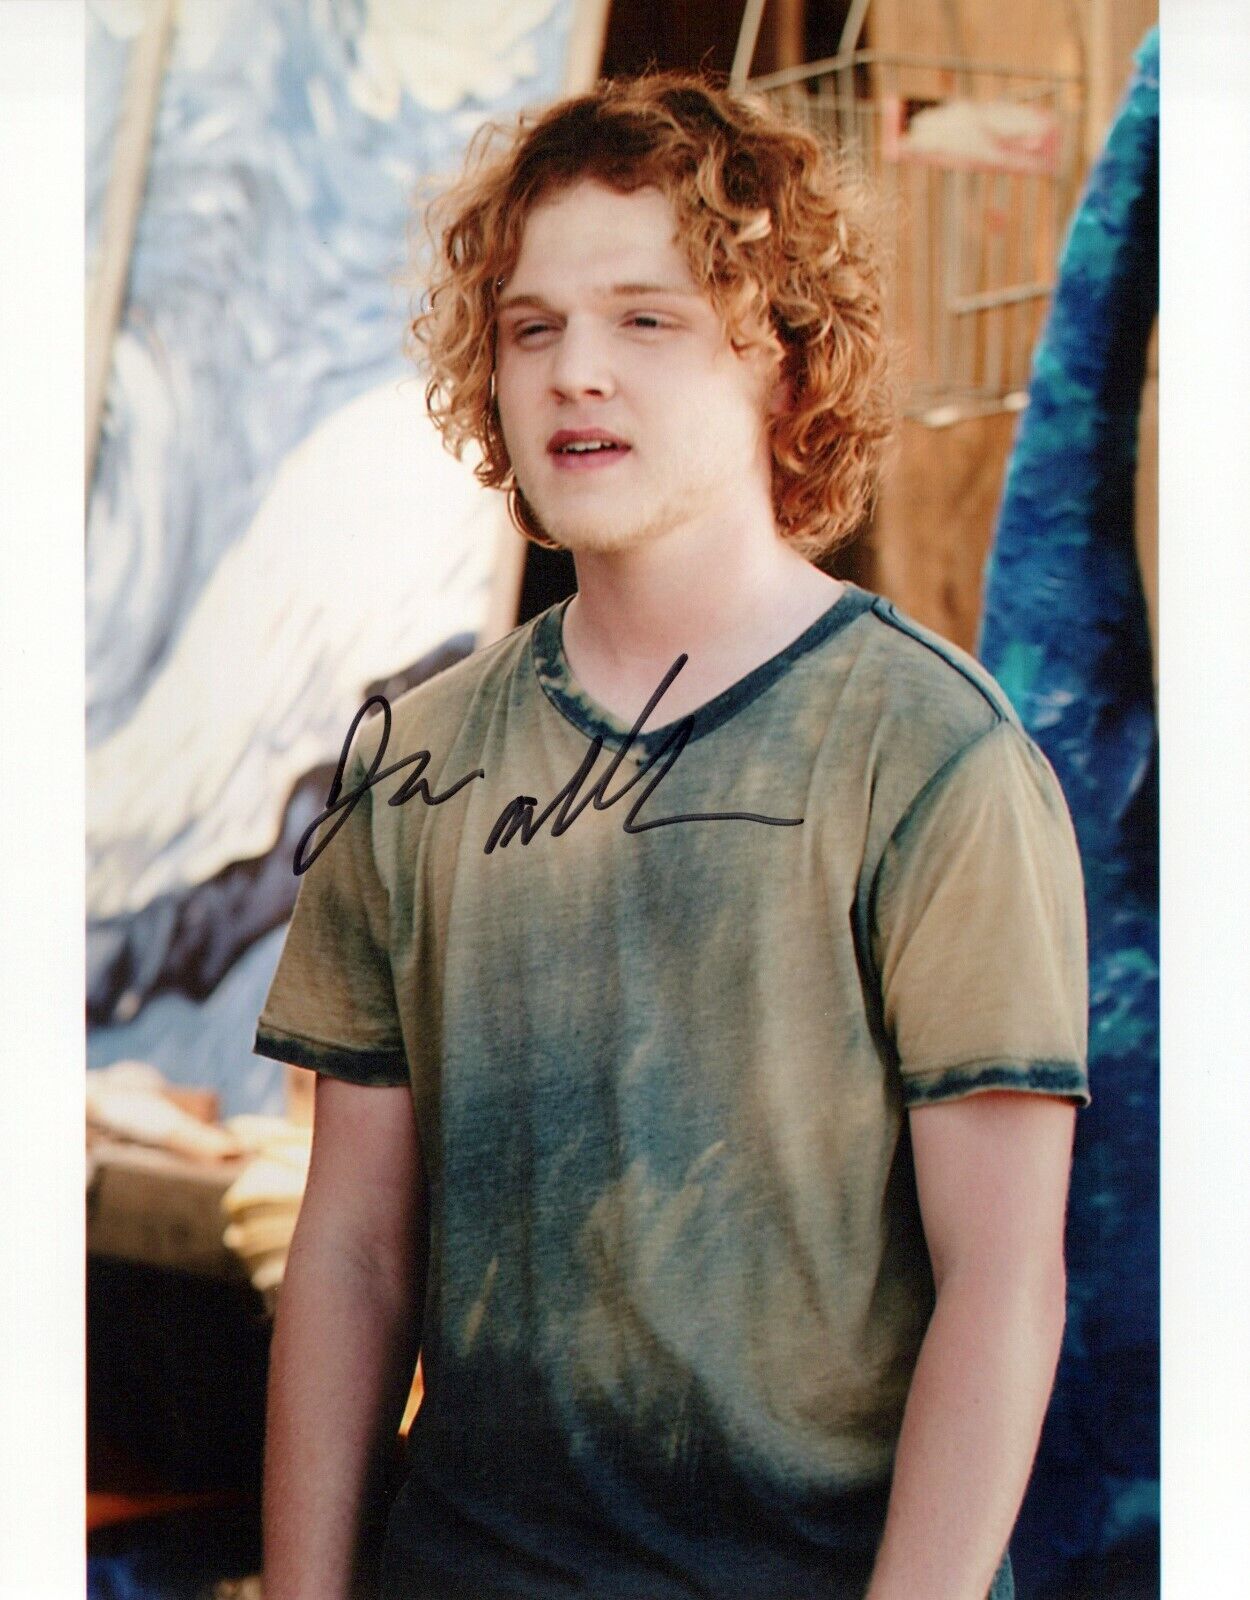 Joe Adler Prom autographed Photo Poster painting signed 8x10 #3 Rolo